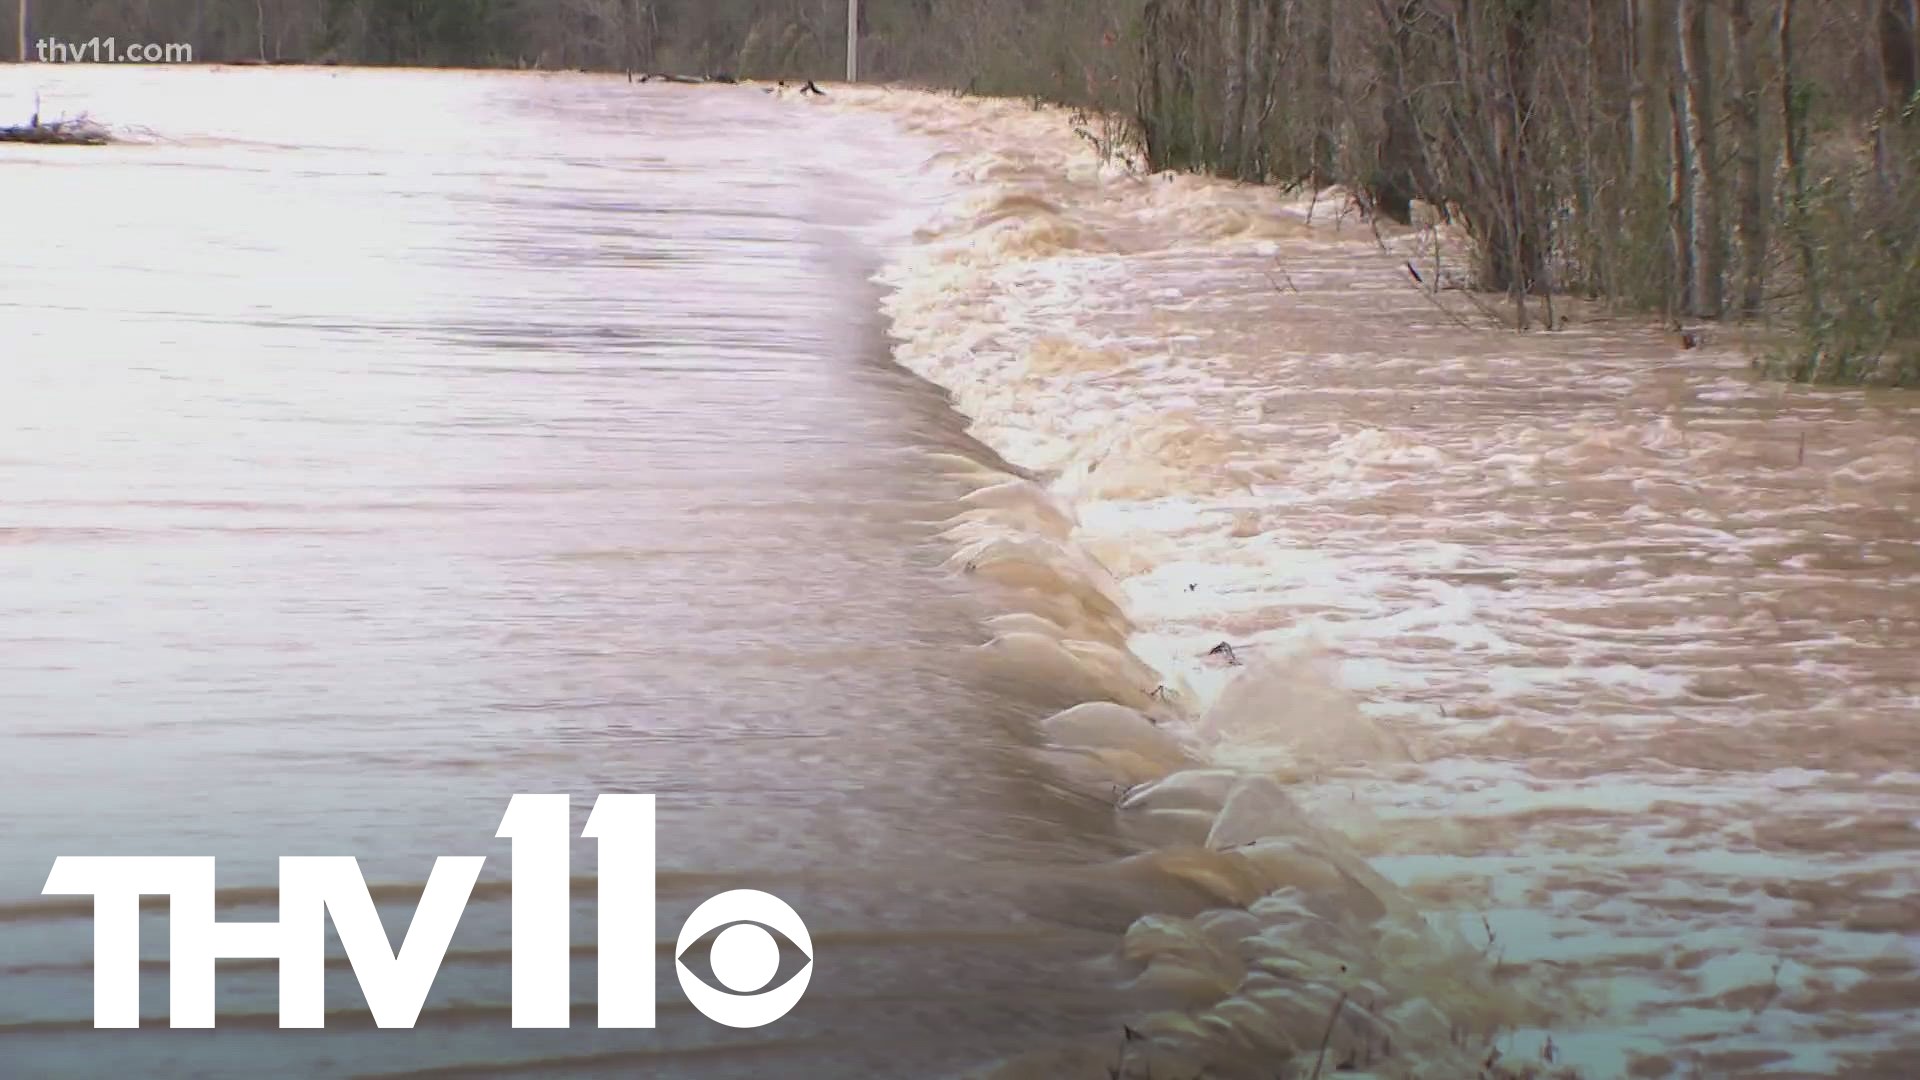 The severe storms in Arkansas this week have continued to impact a number of areas, including Yell County, who saw many of their roads closed as a result.